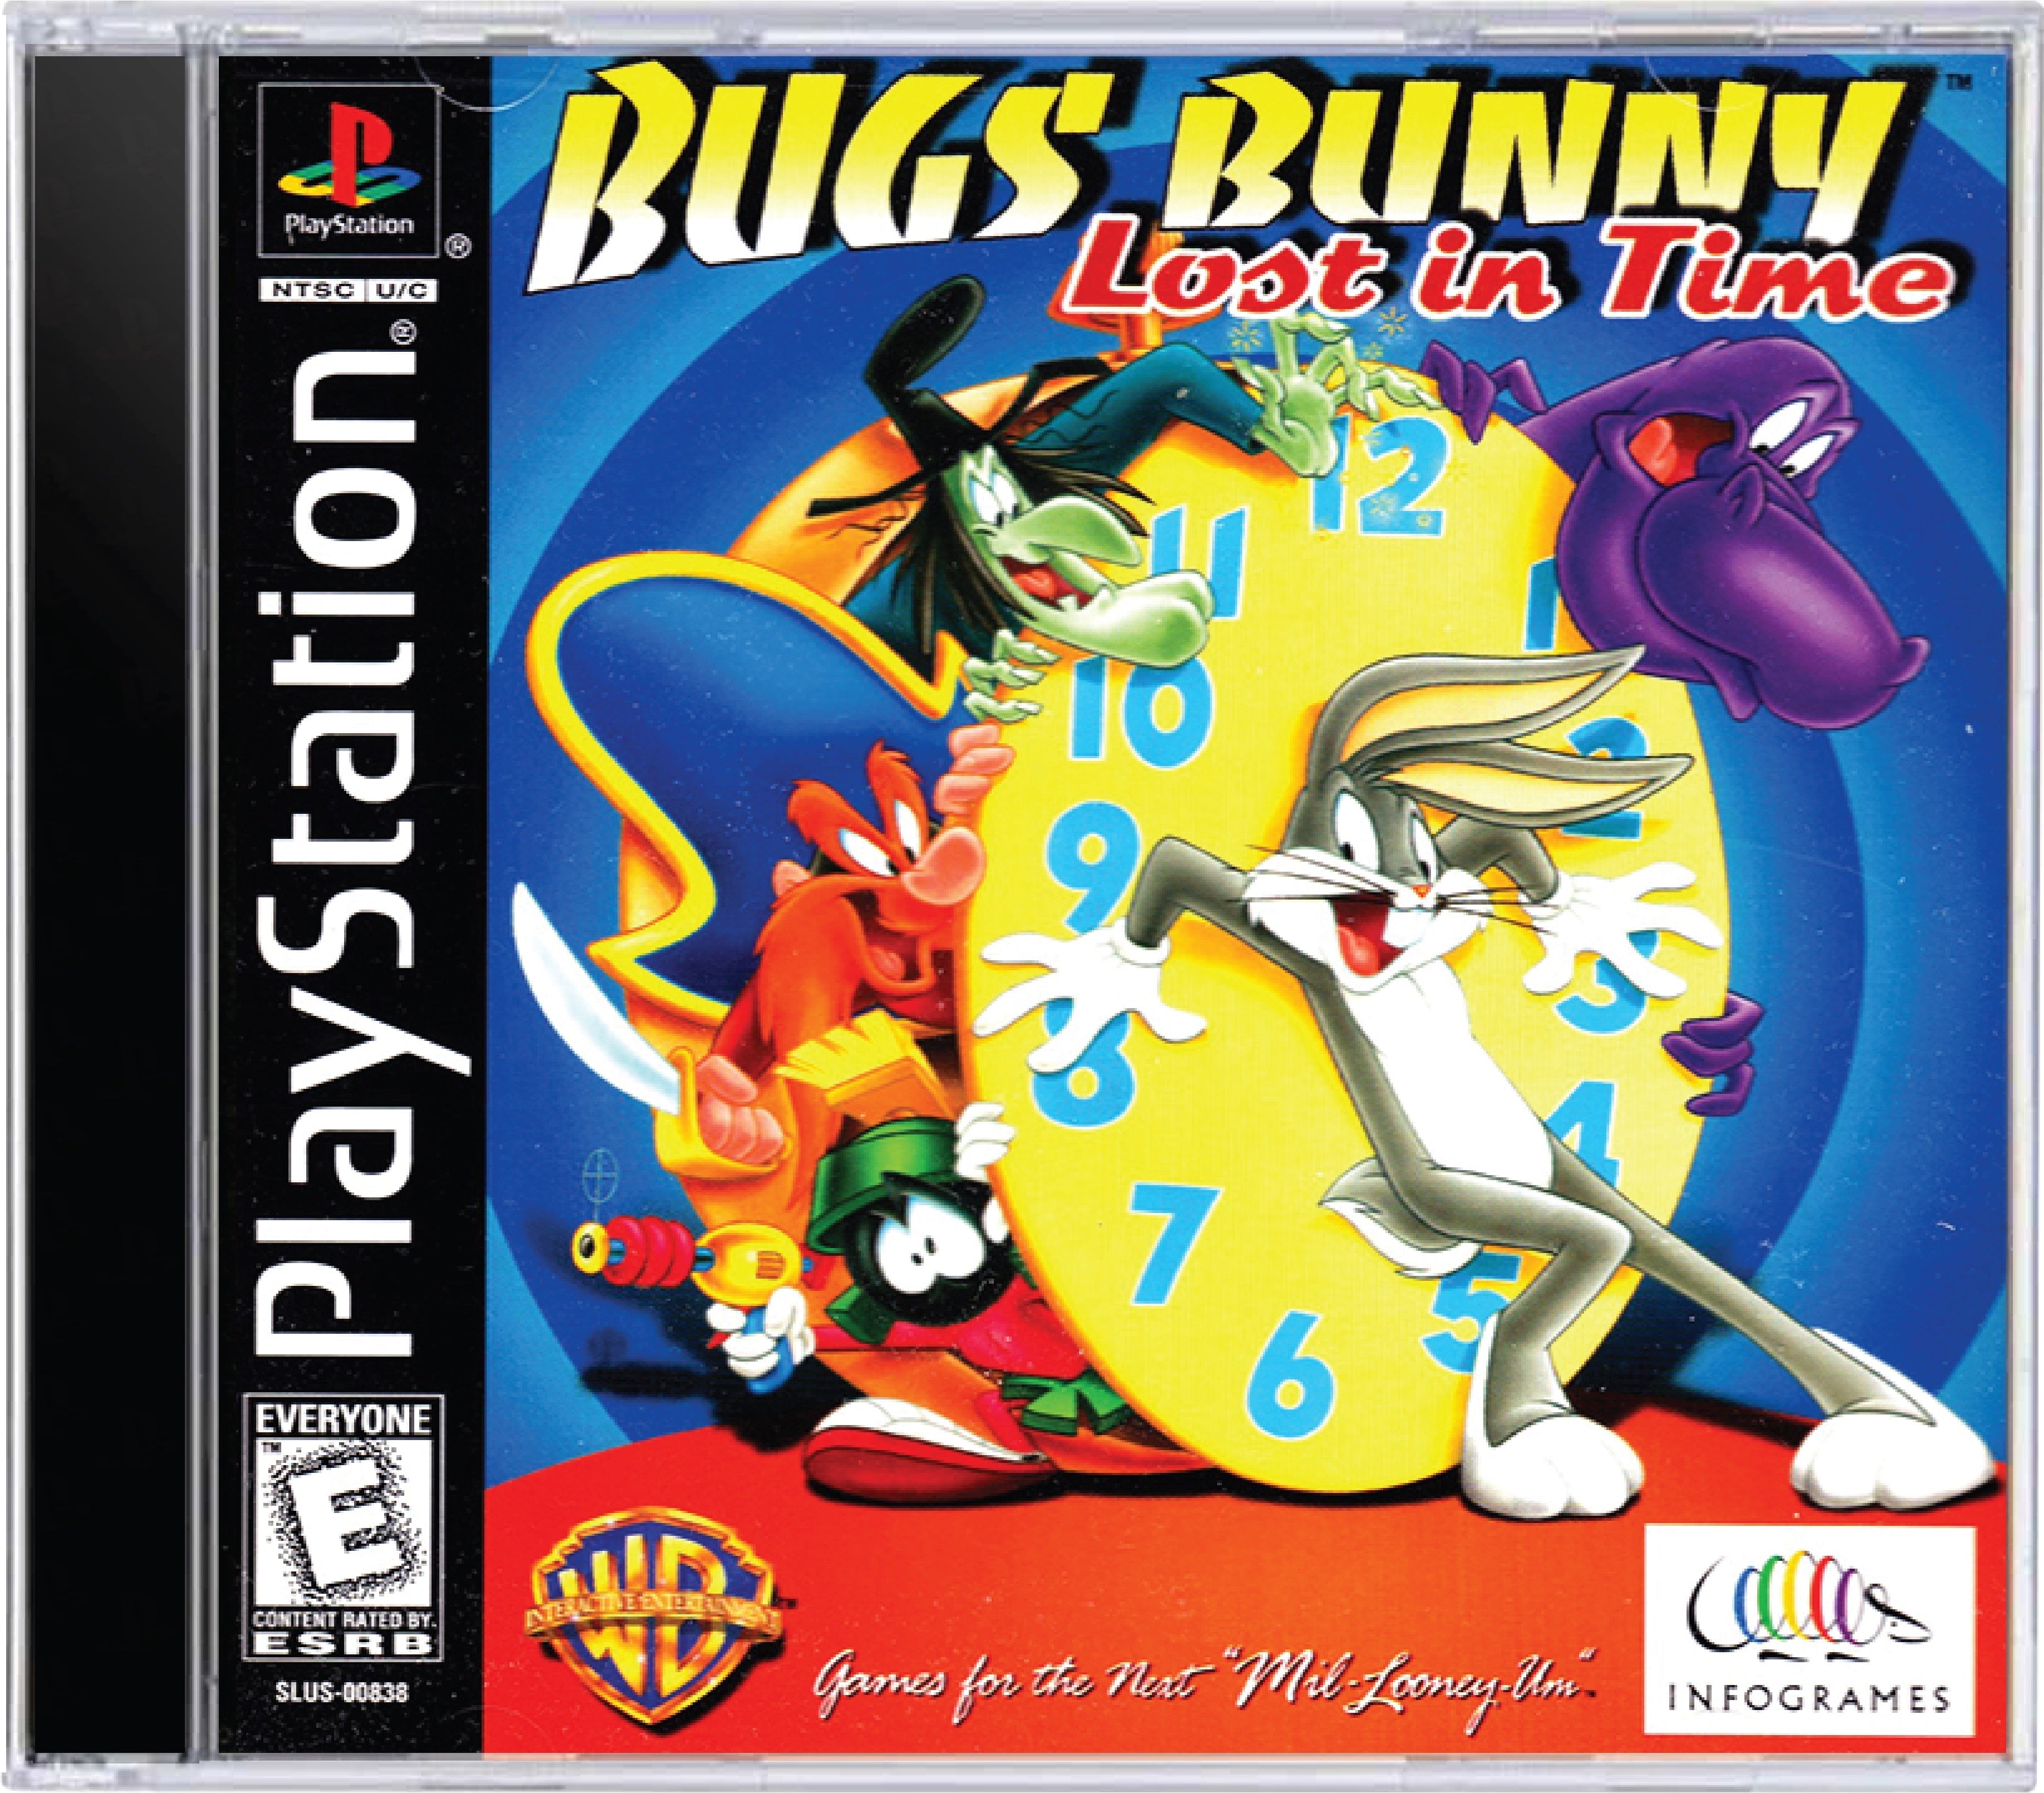 Bugs Bunny Lost in Time Cover Art and Product Photo